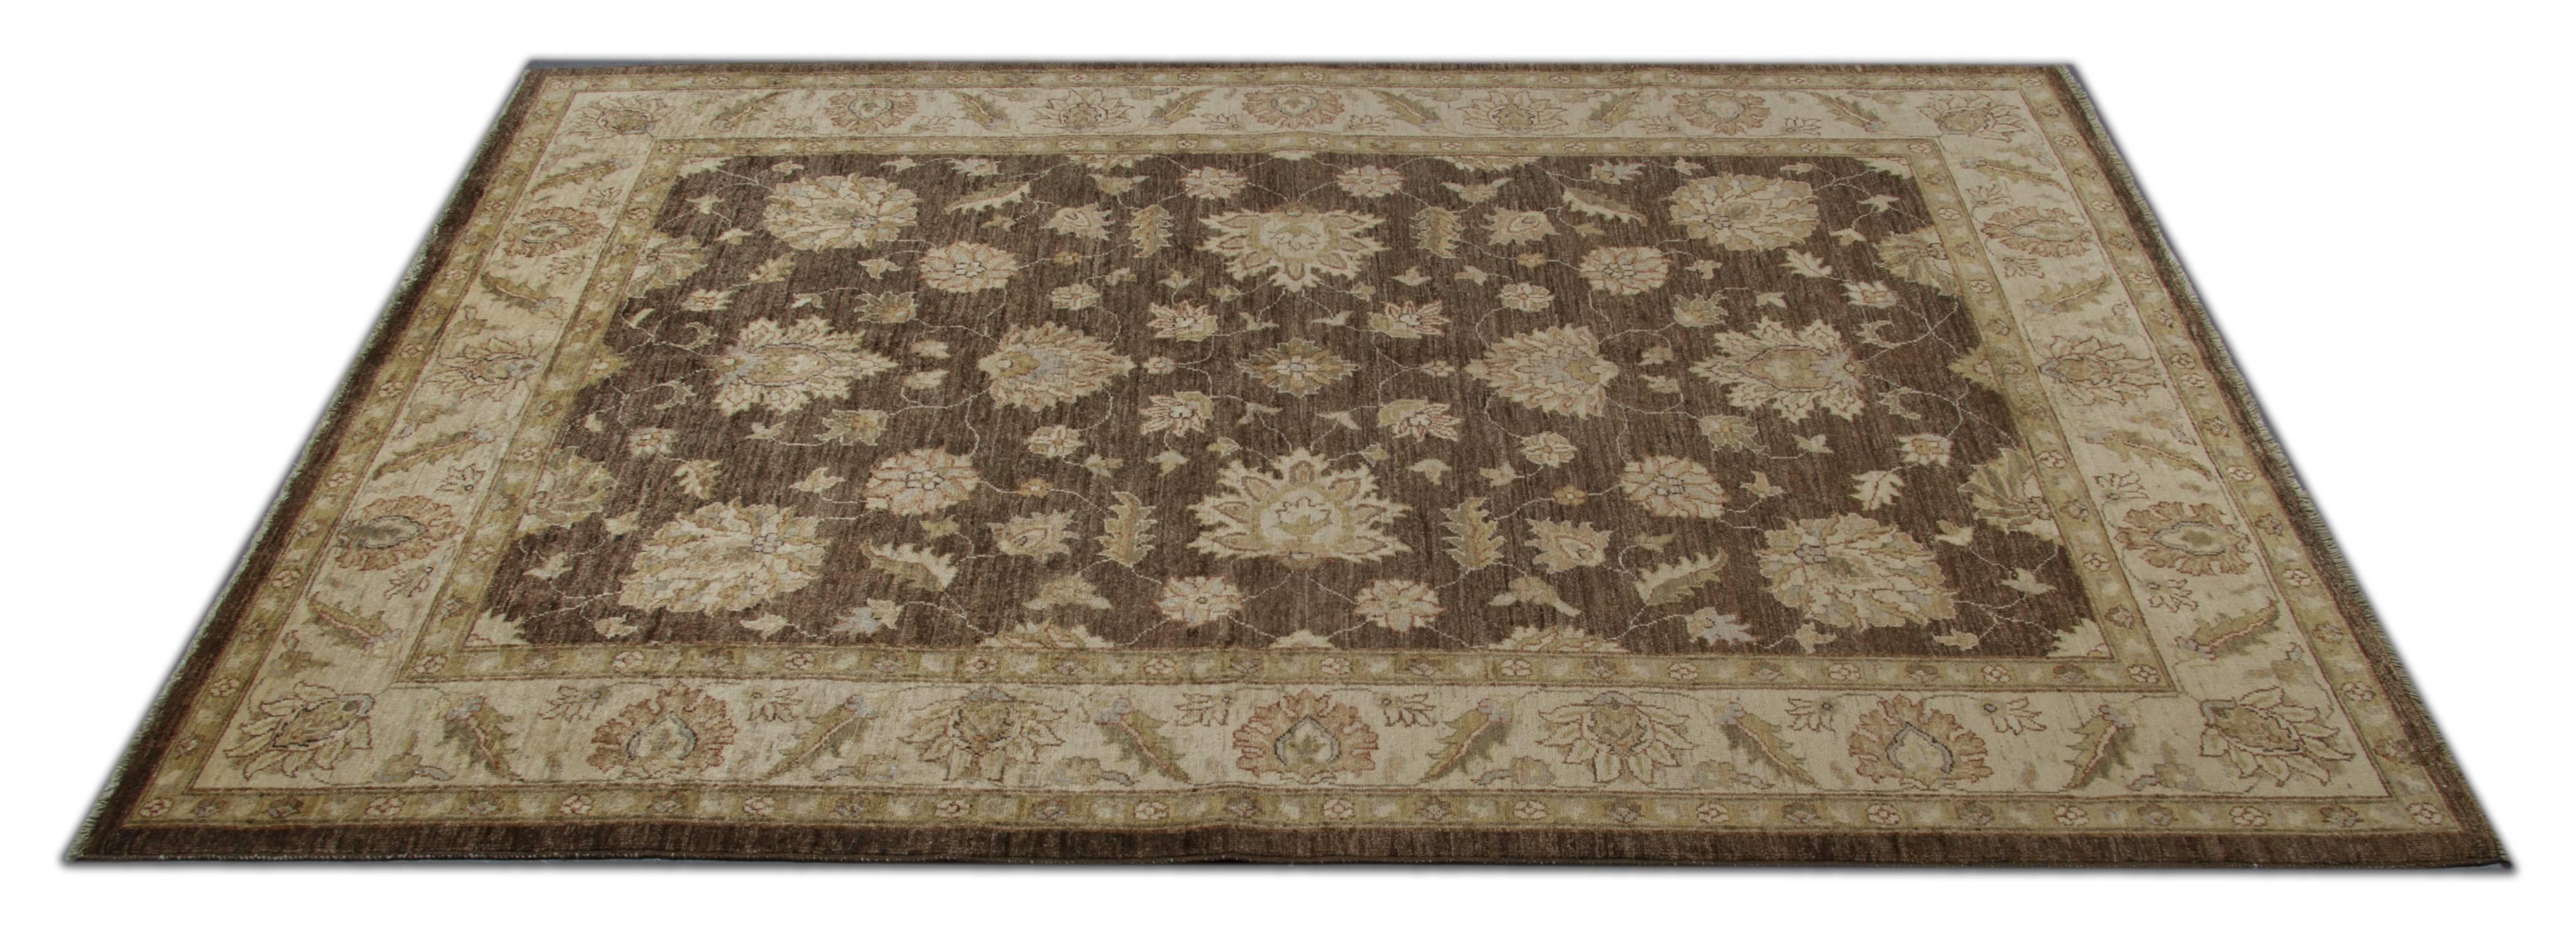 This a luxury fine Ziegler Mahal gold beige rug with a beautiful deep red border. The floral rug is woven with hand spun wool. These luxury rugs are made with 100% natural organic vegetable dyes. The large-scale design makes Sultanabad rugs as the